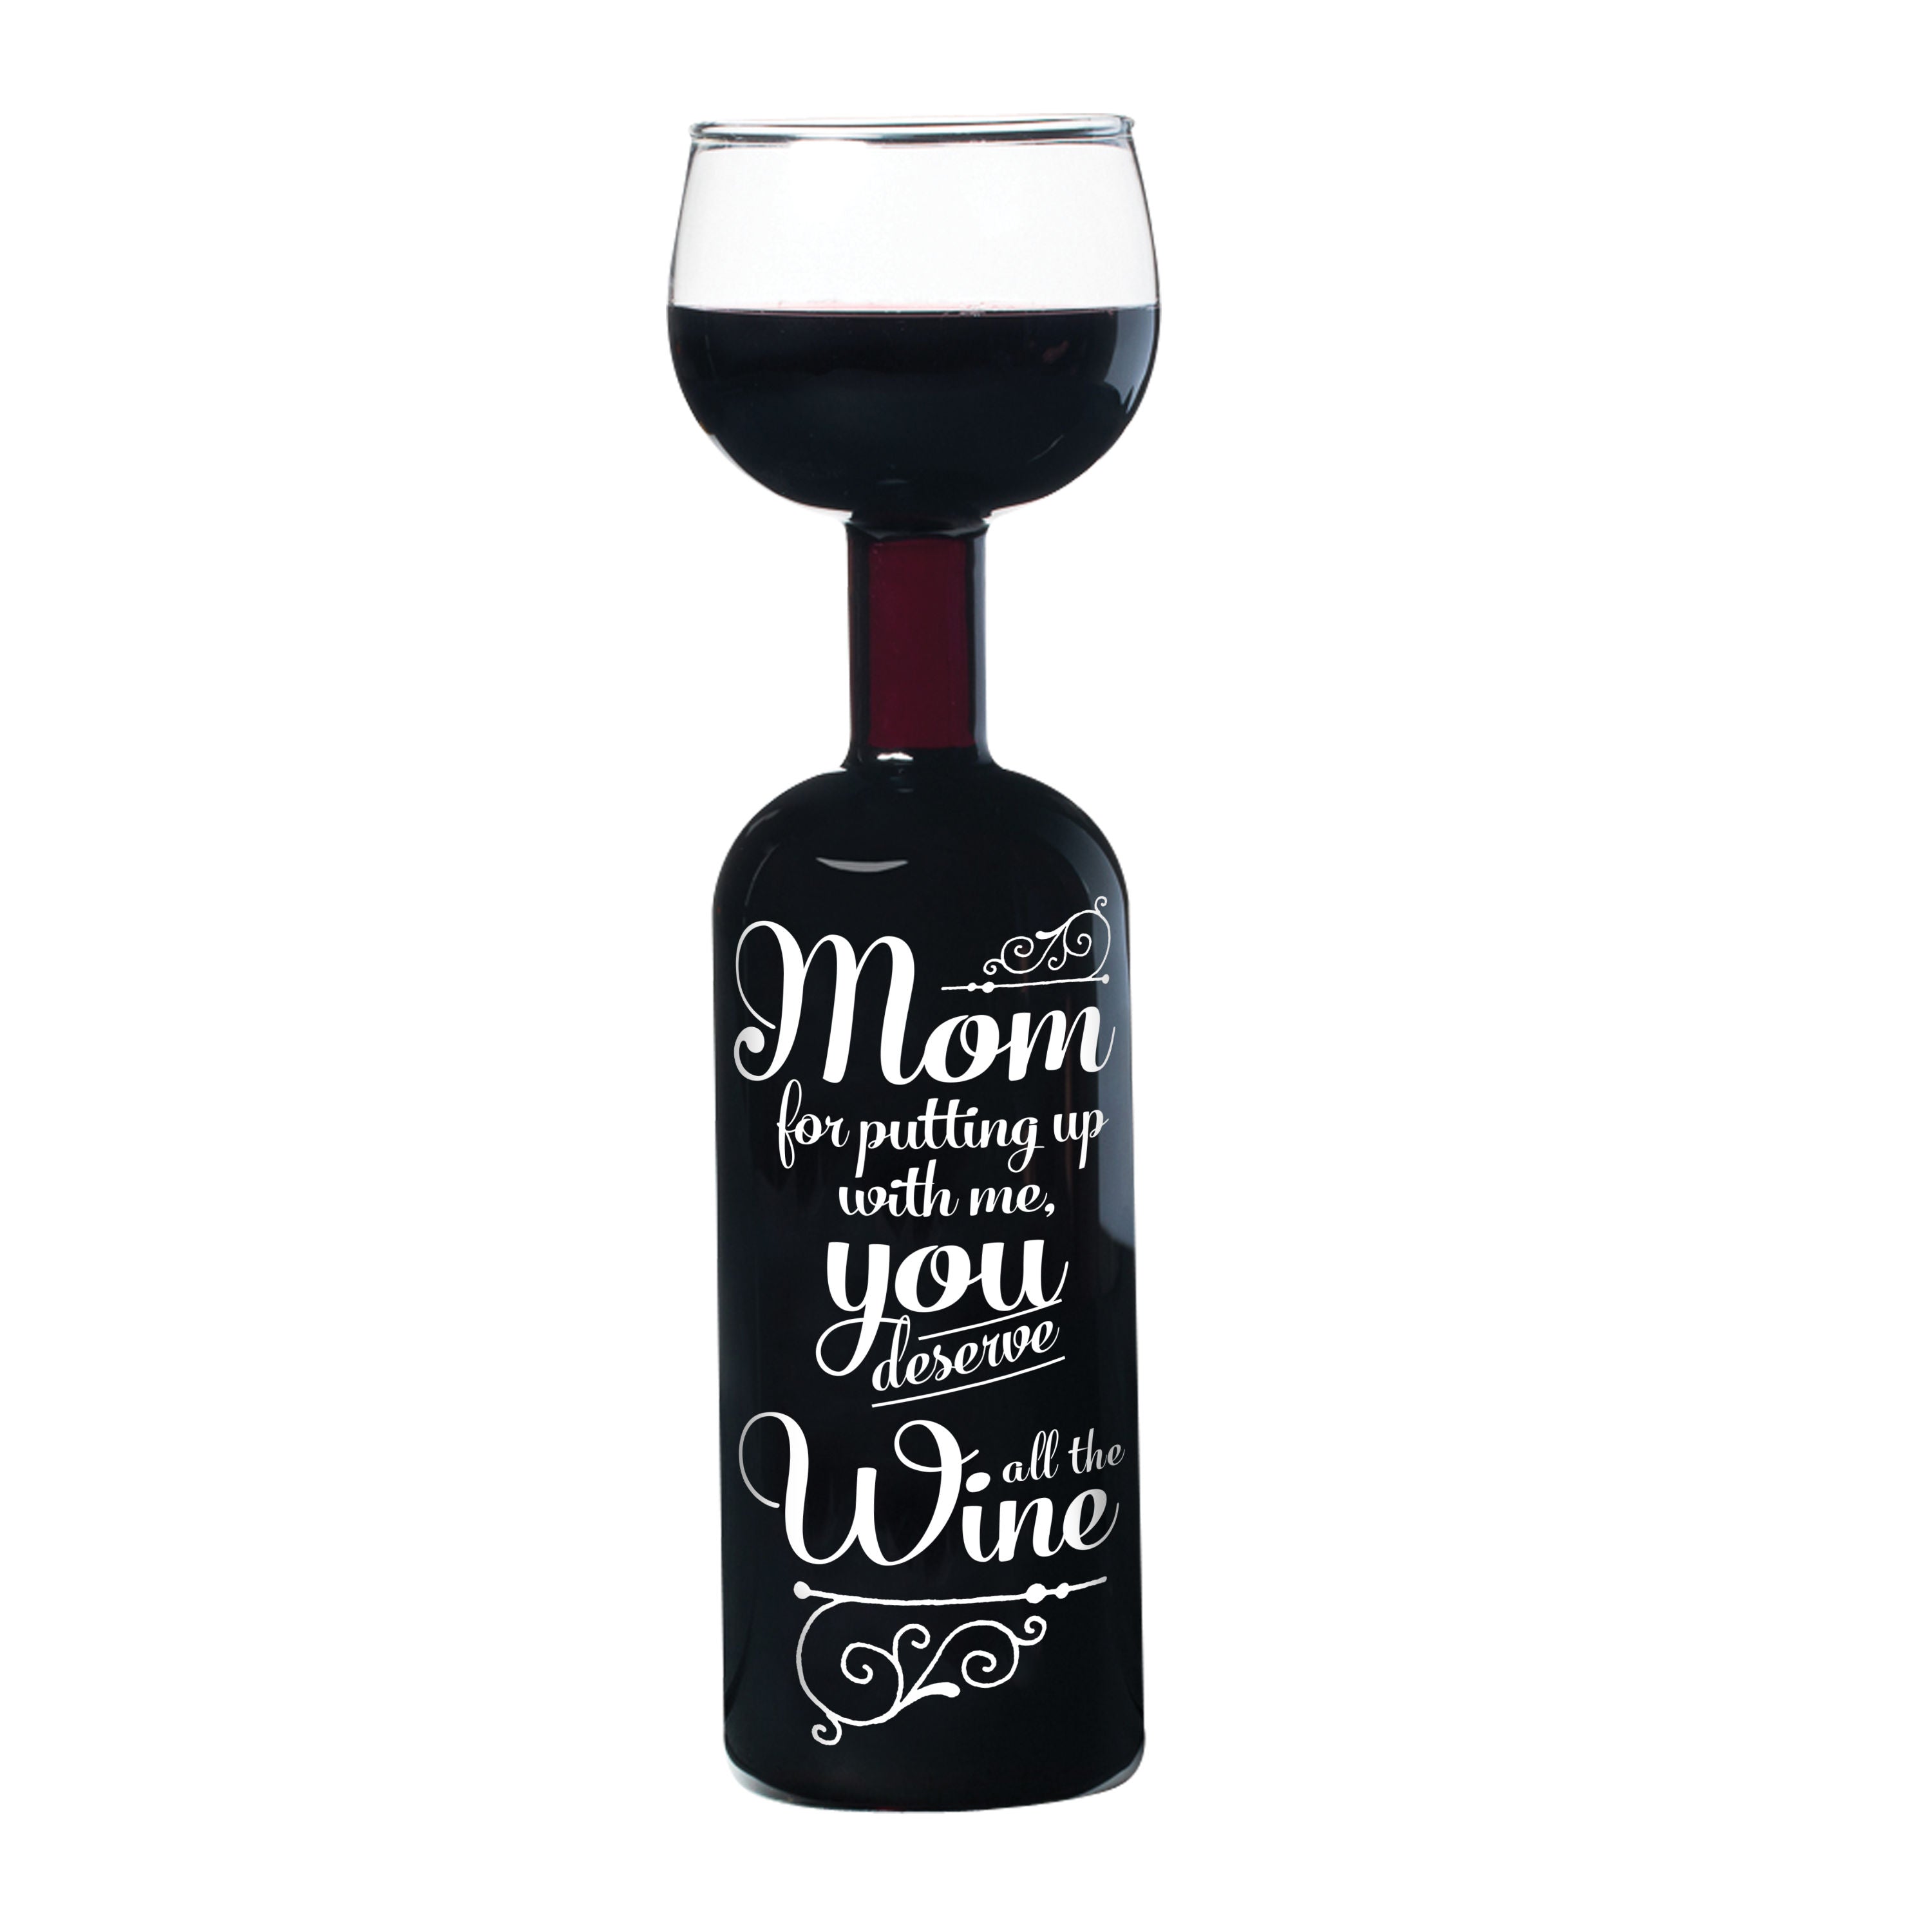 The Wine for Mom Wine Bottle Glass